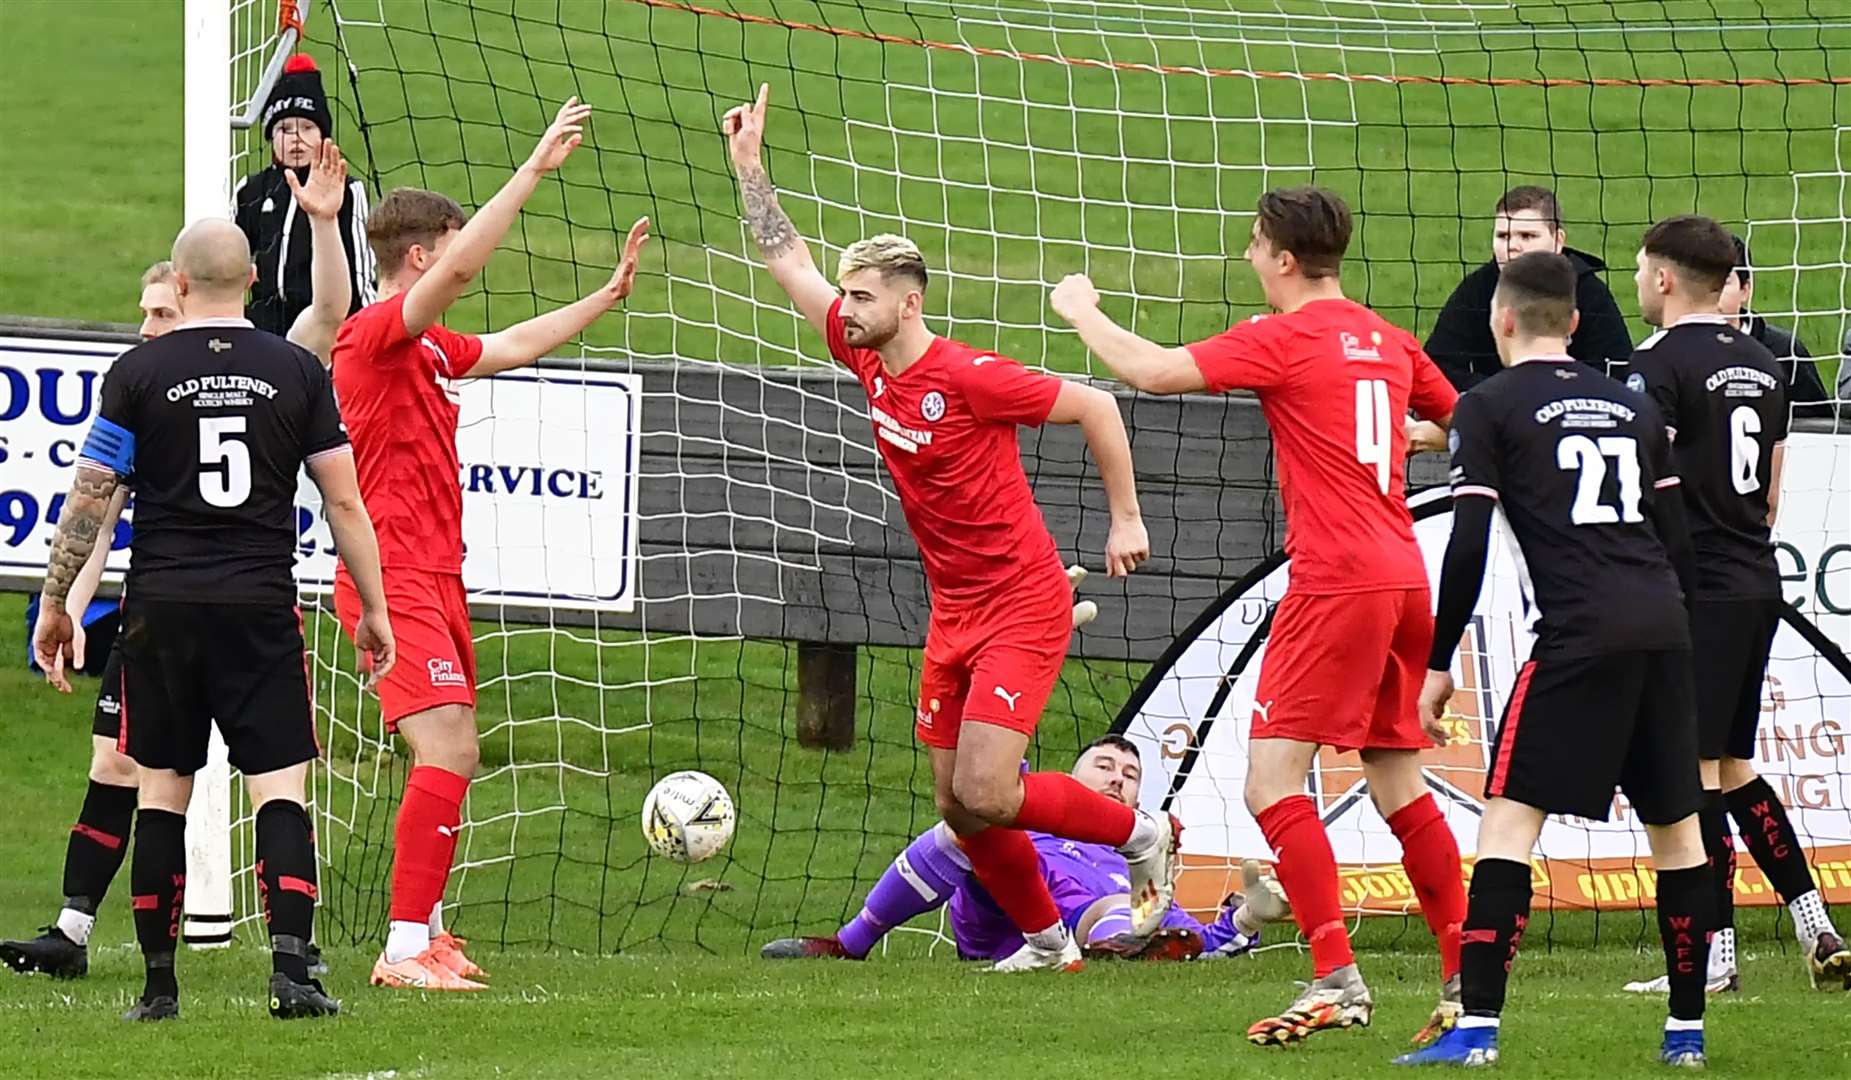 Jordan MacRae turns away to celebrate after giving Brora Rangers an early lead in Saturday's Highland League Cup tie at Wick. Picture: Mel Roger